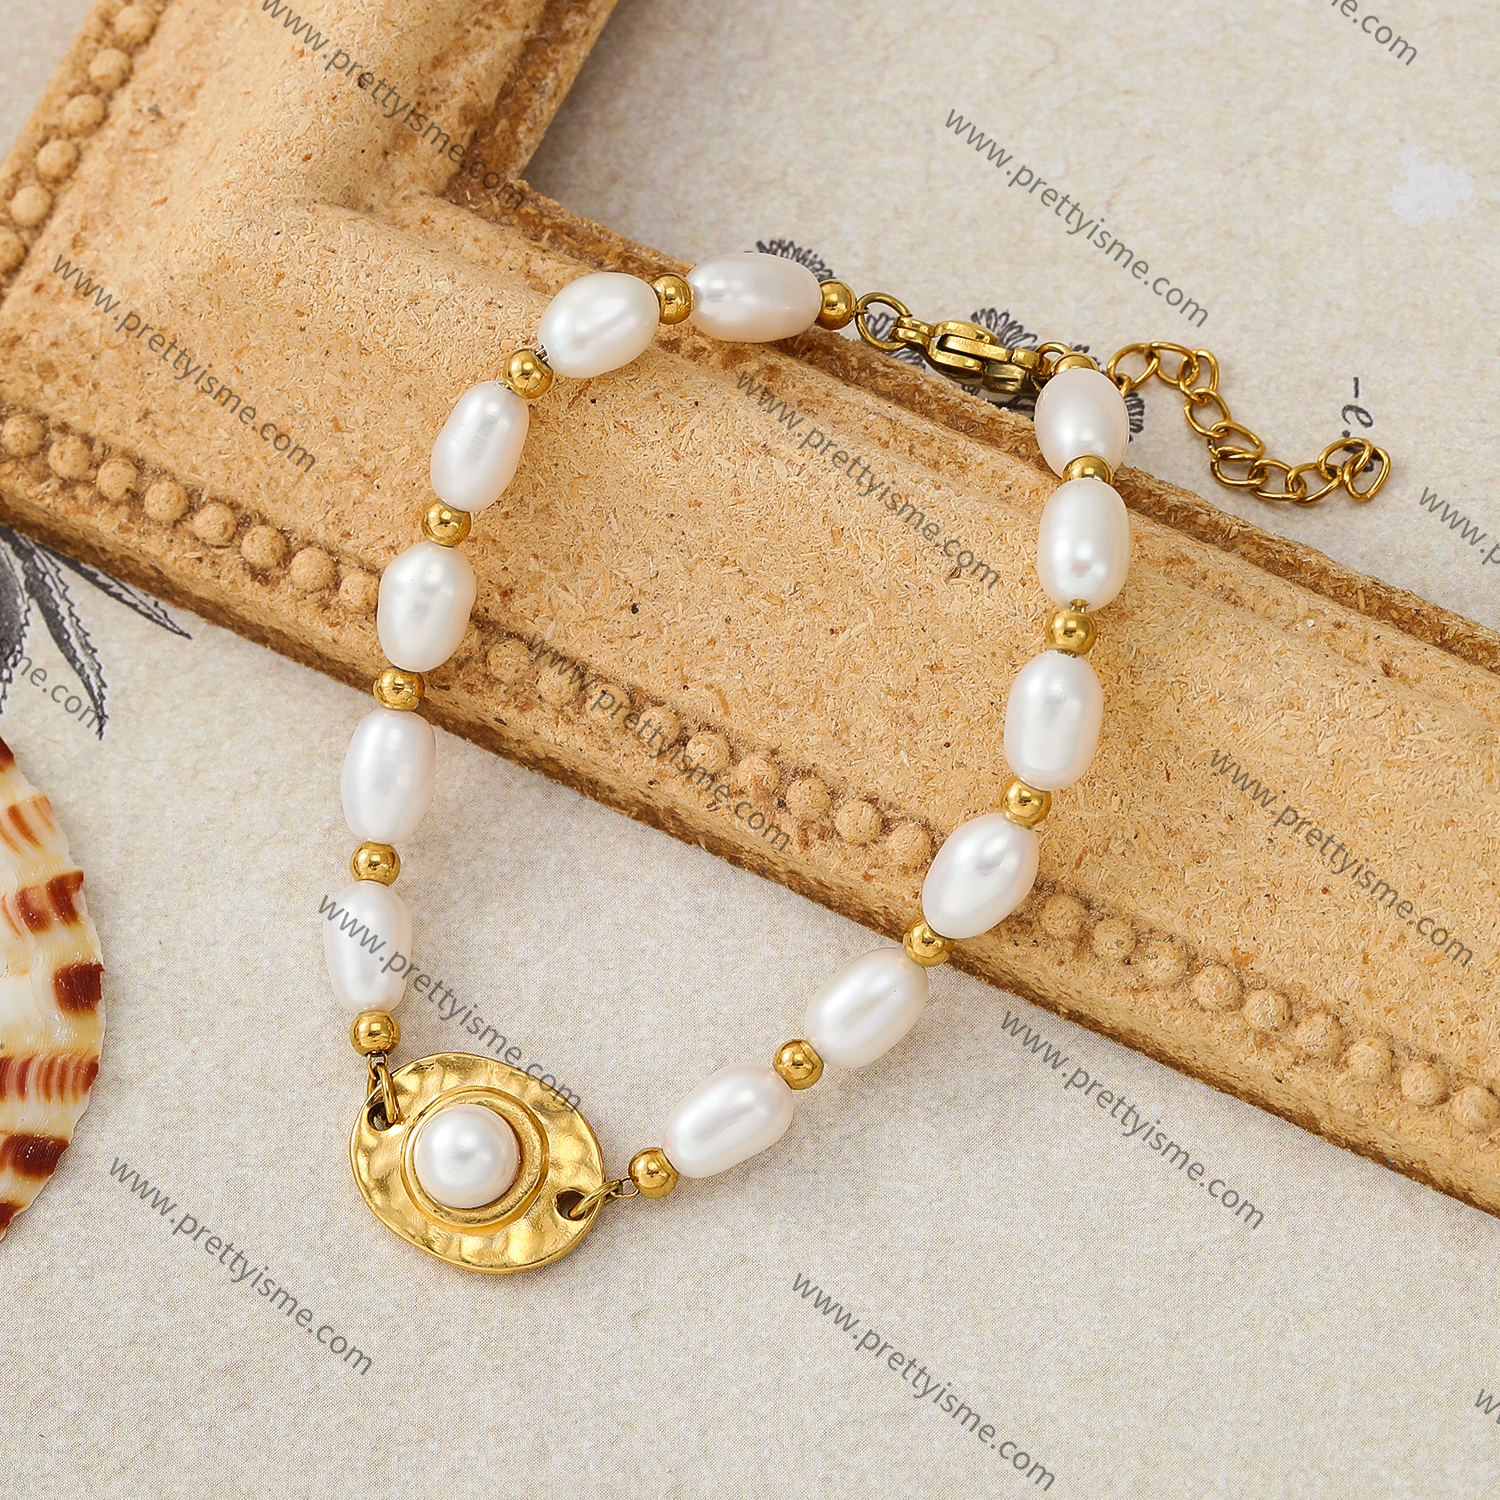 Pearl Bracelet Gold Plated 18K Gentle Delicate Bracelet with Small Gold Beads (4).webp